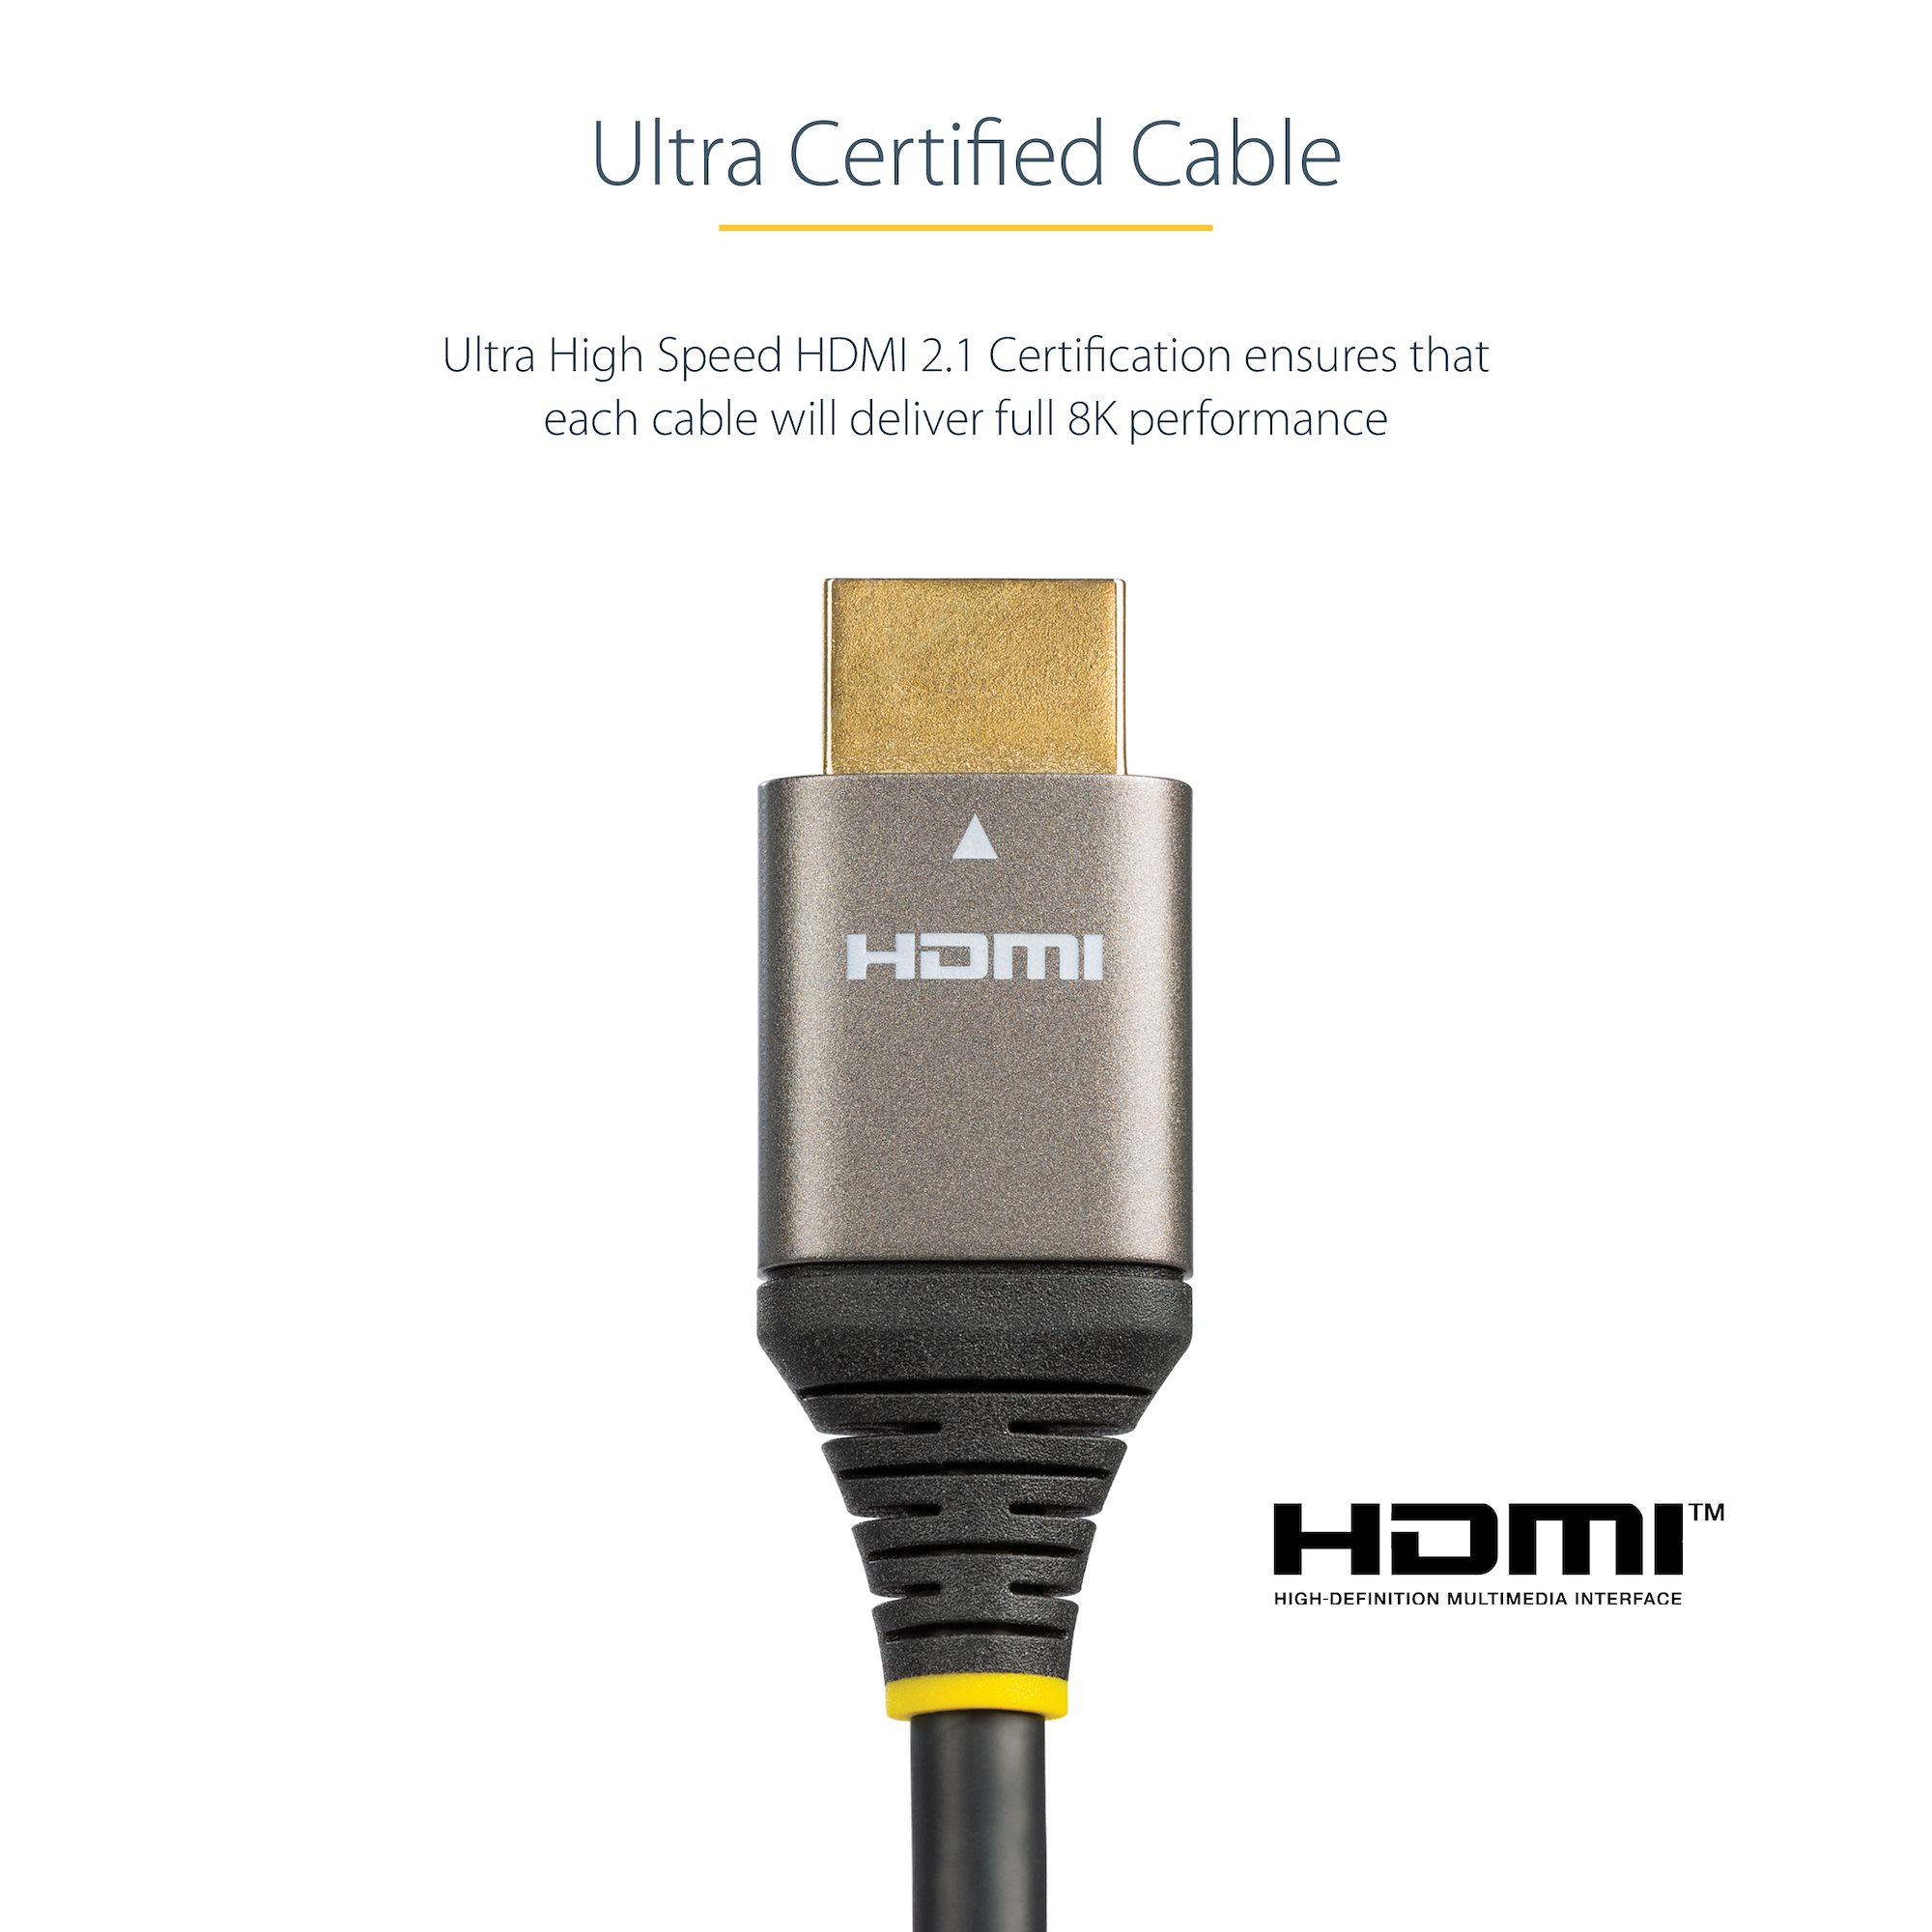 Cable HDMI 5 mts – Proyecto 101